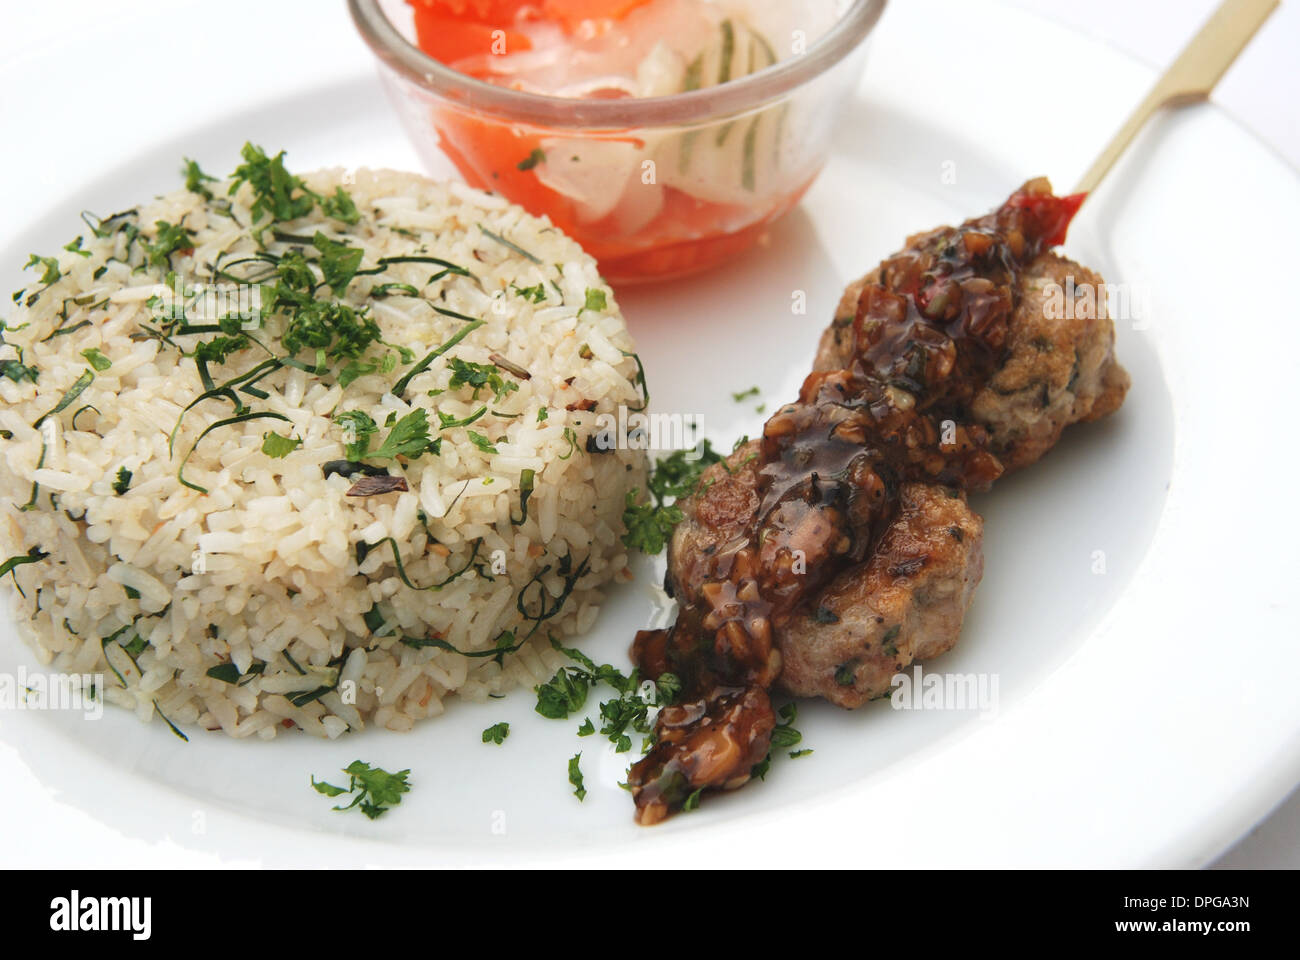 herb fried rice with meat ball Stock Photo